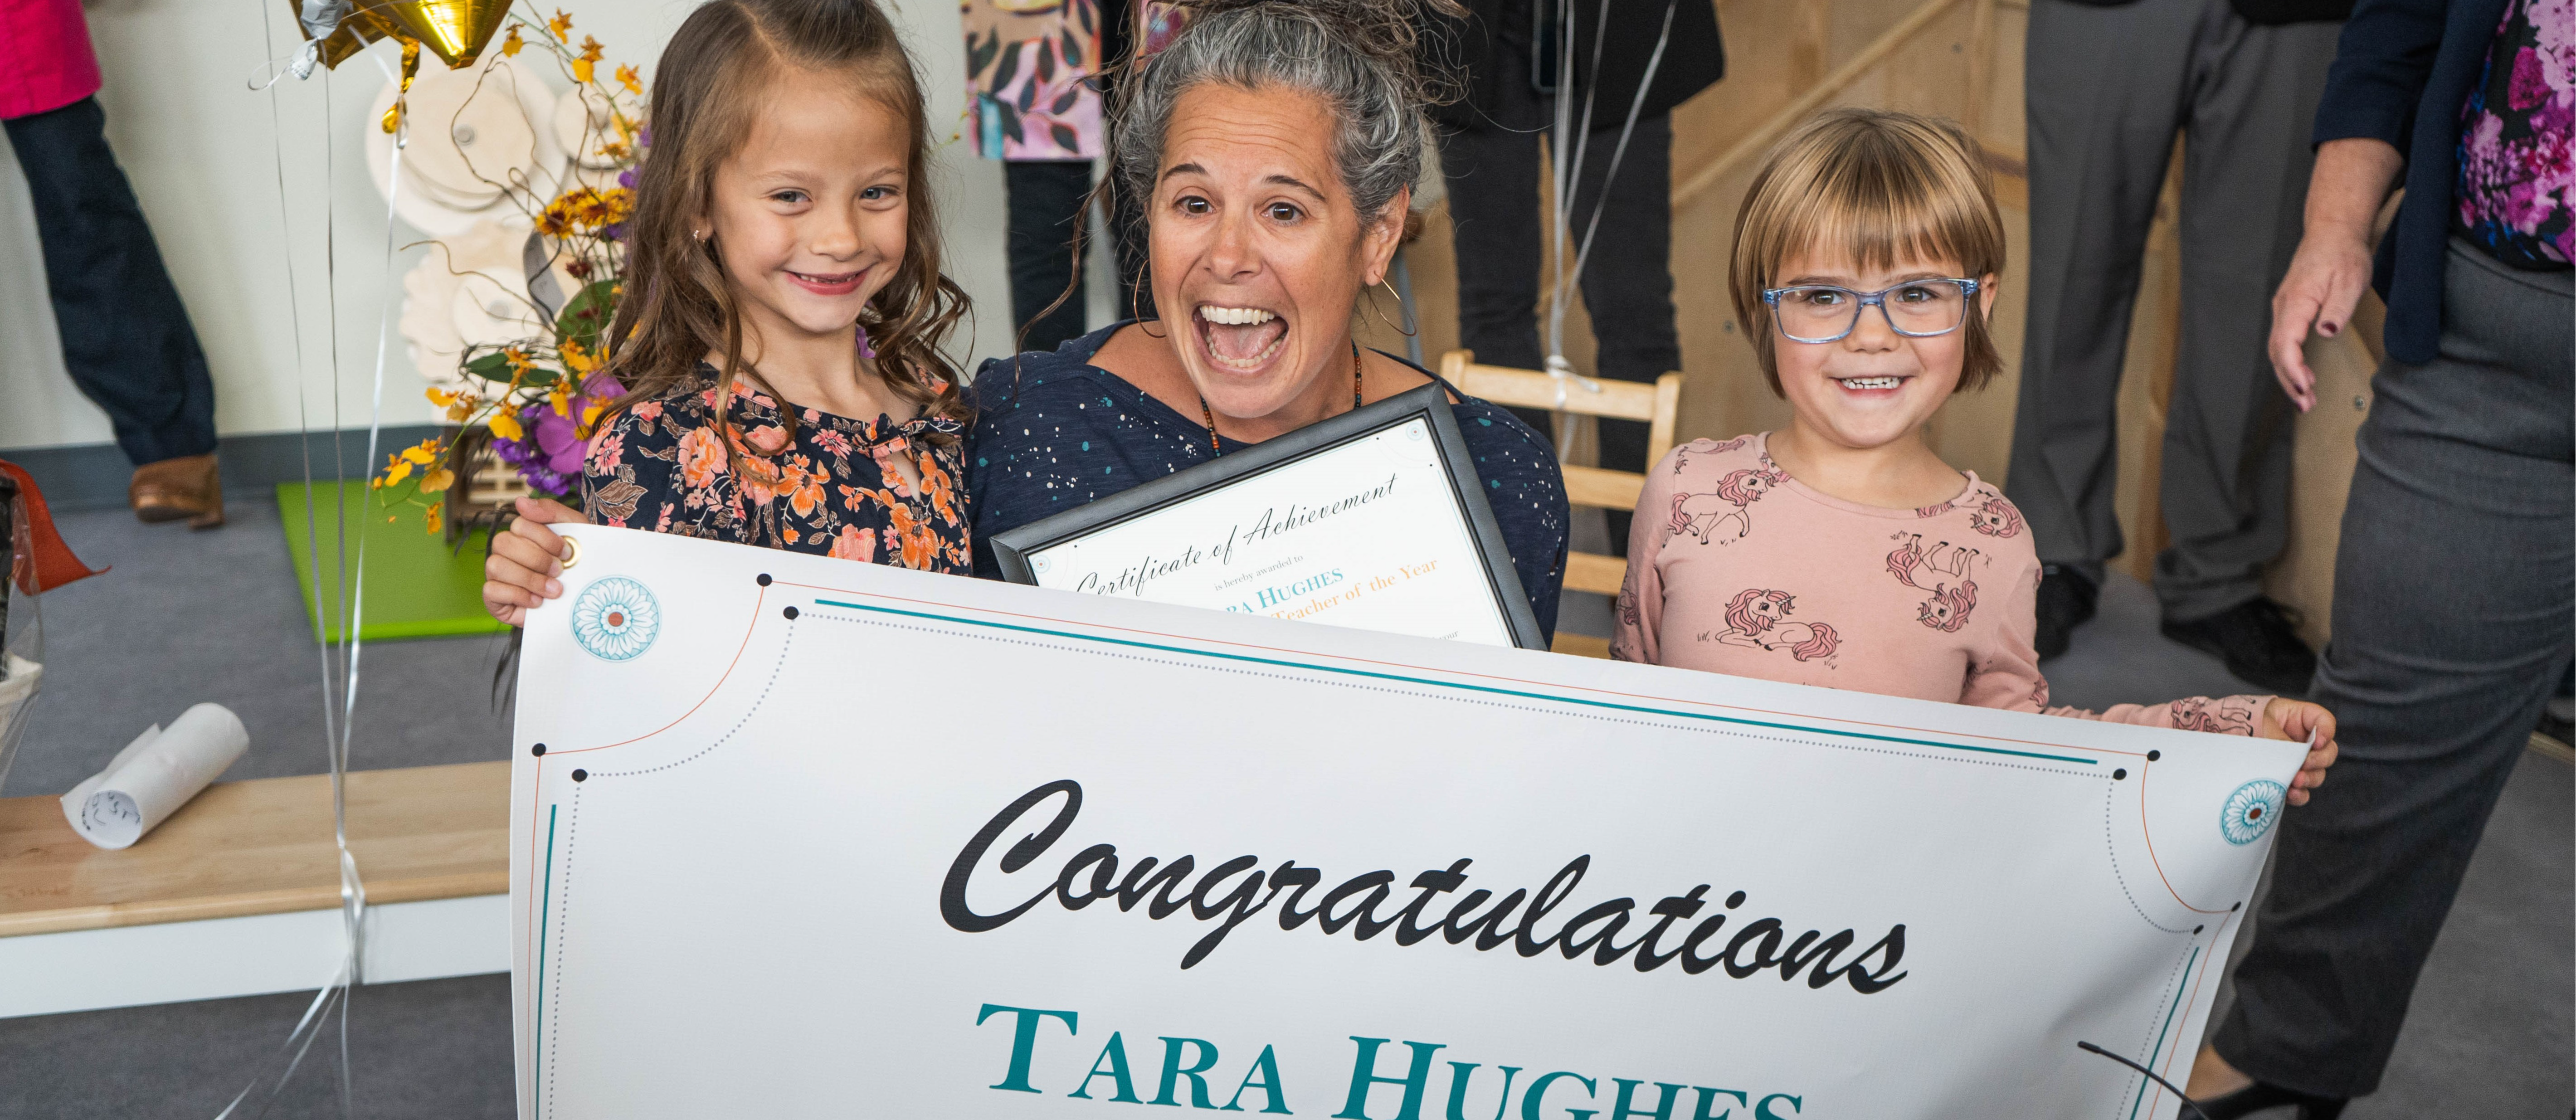 Tara Hughes holding a banner "Congratulations Tara Hughes" with two of her female students